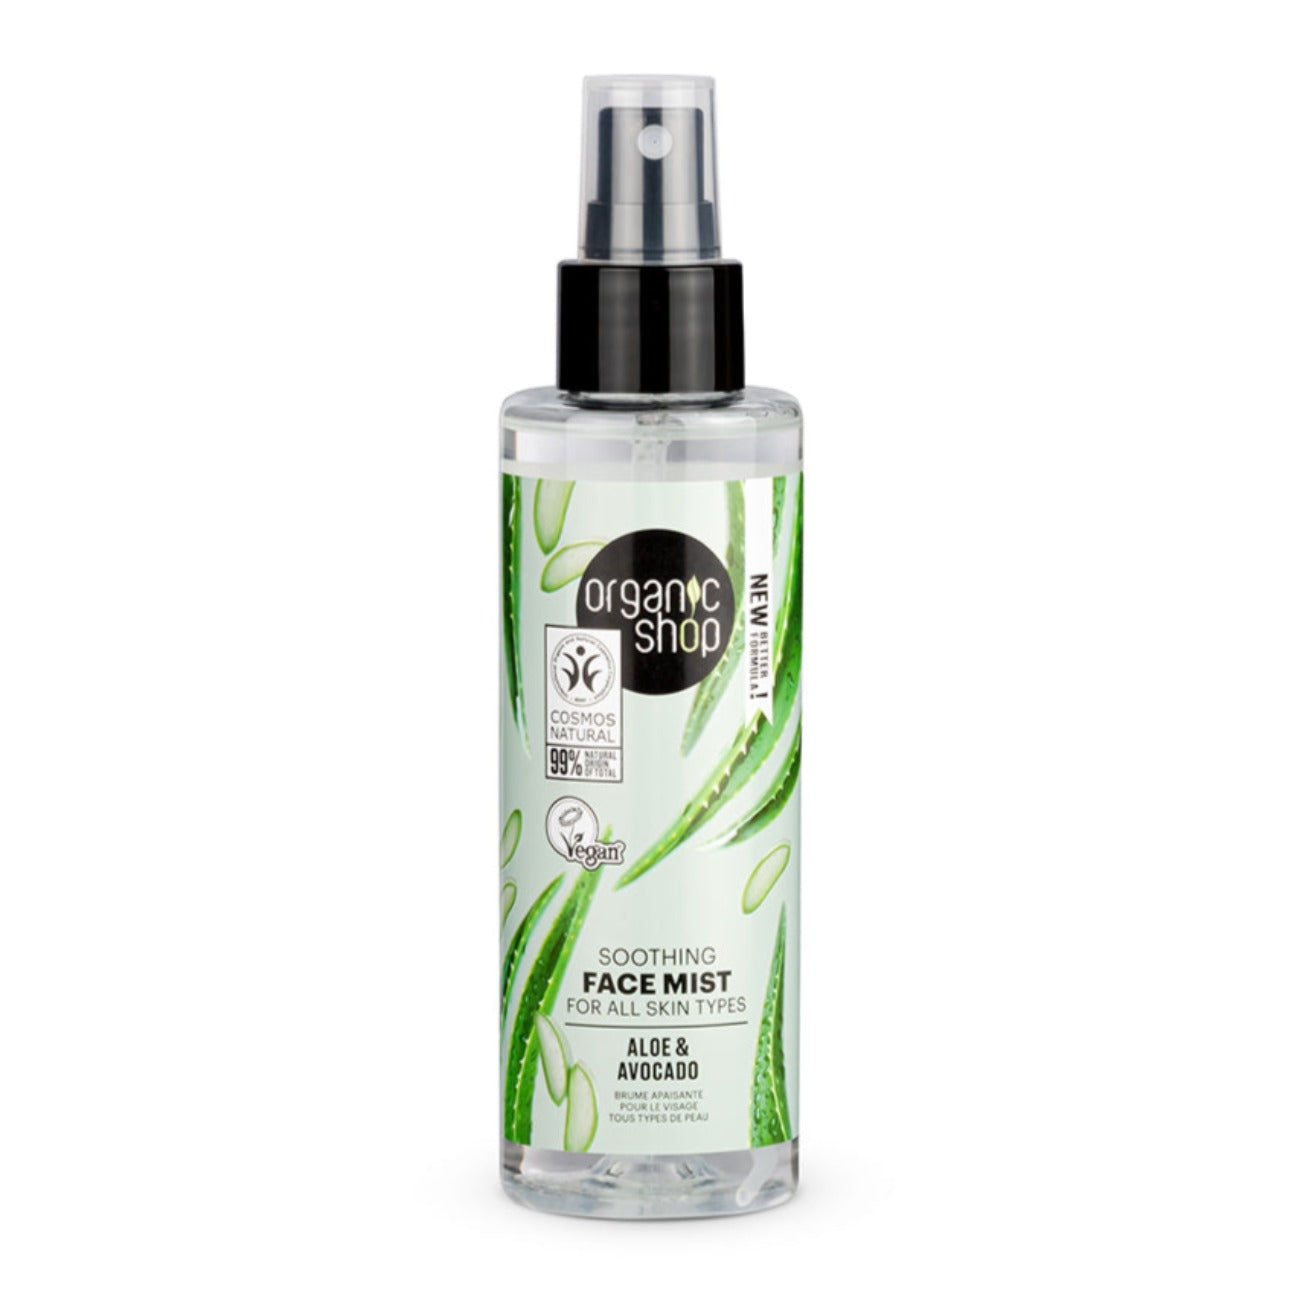 Avocado and Aloe Soothing Face Mist for All Skin Types 150 ml